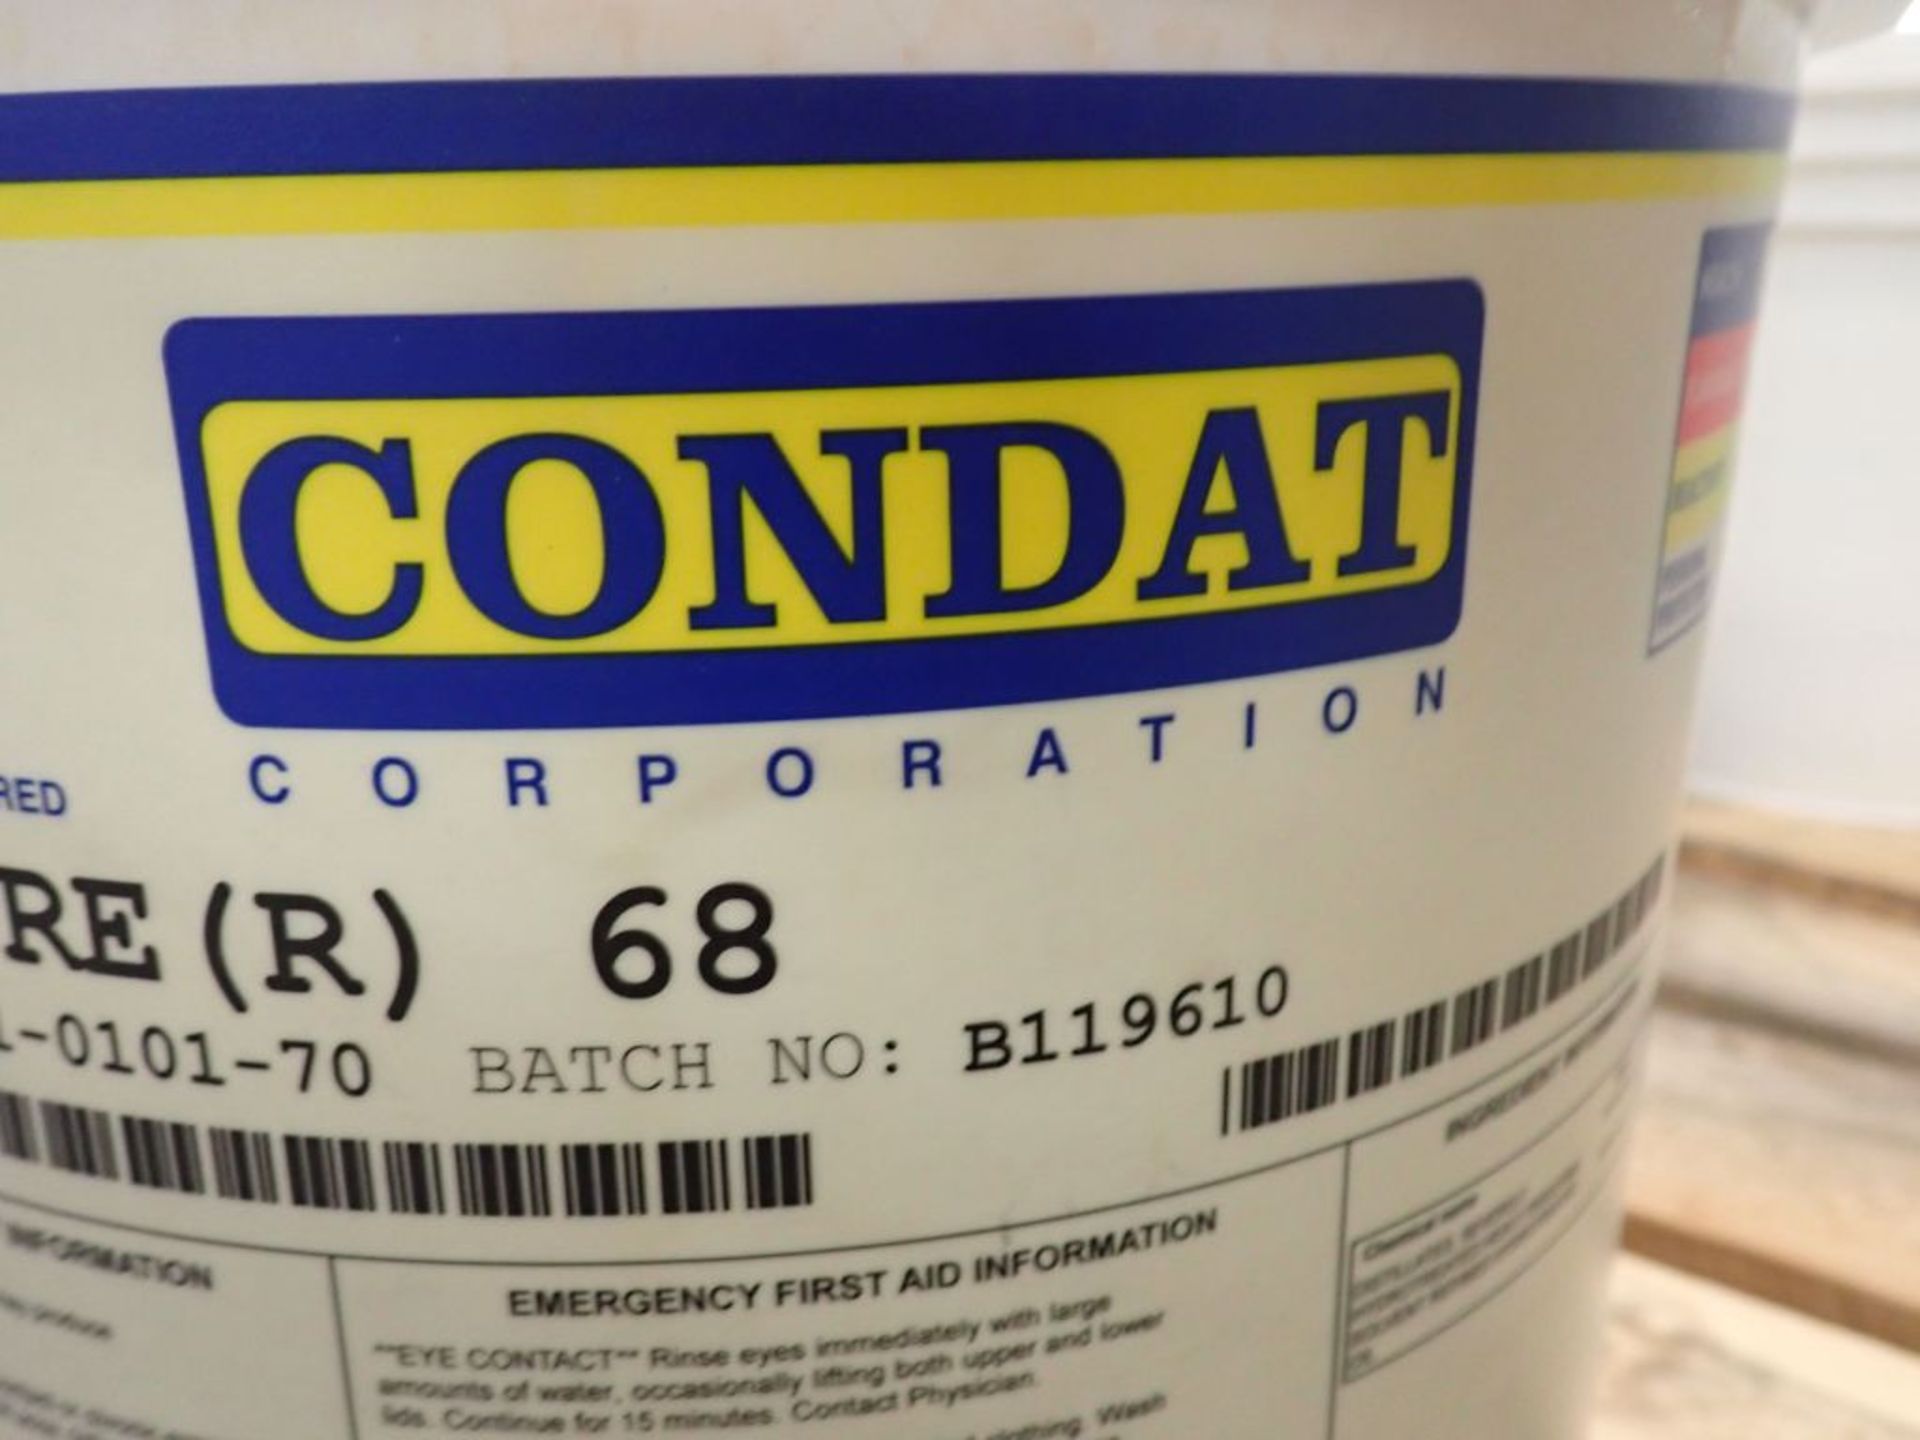 Lot of (4) Containers of 5-Gallon Condat Wire Lubricant | Item Key: 041-0191-70; New Surplus - Image 9 of 12